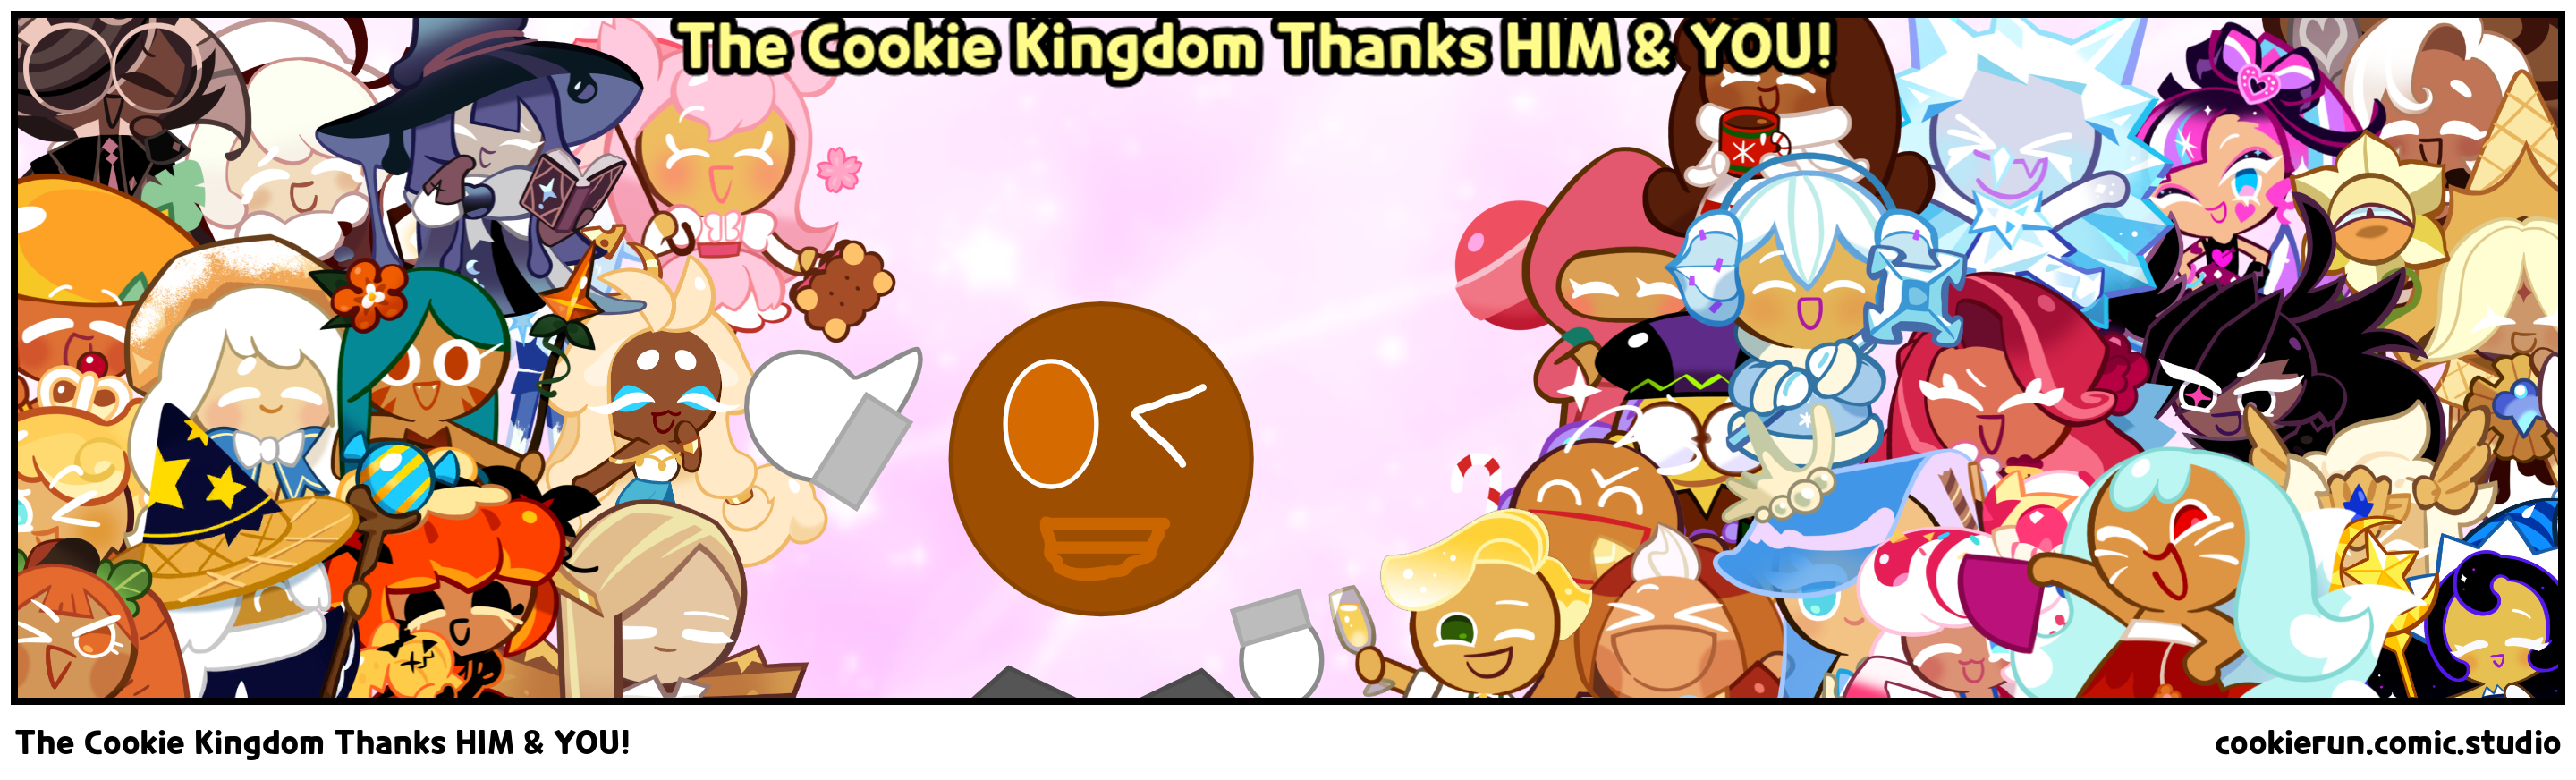 The Cookie Kingdom Thanks HIM & YOU!